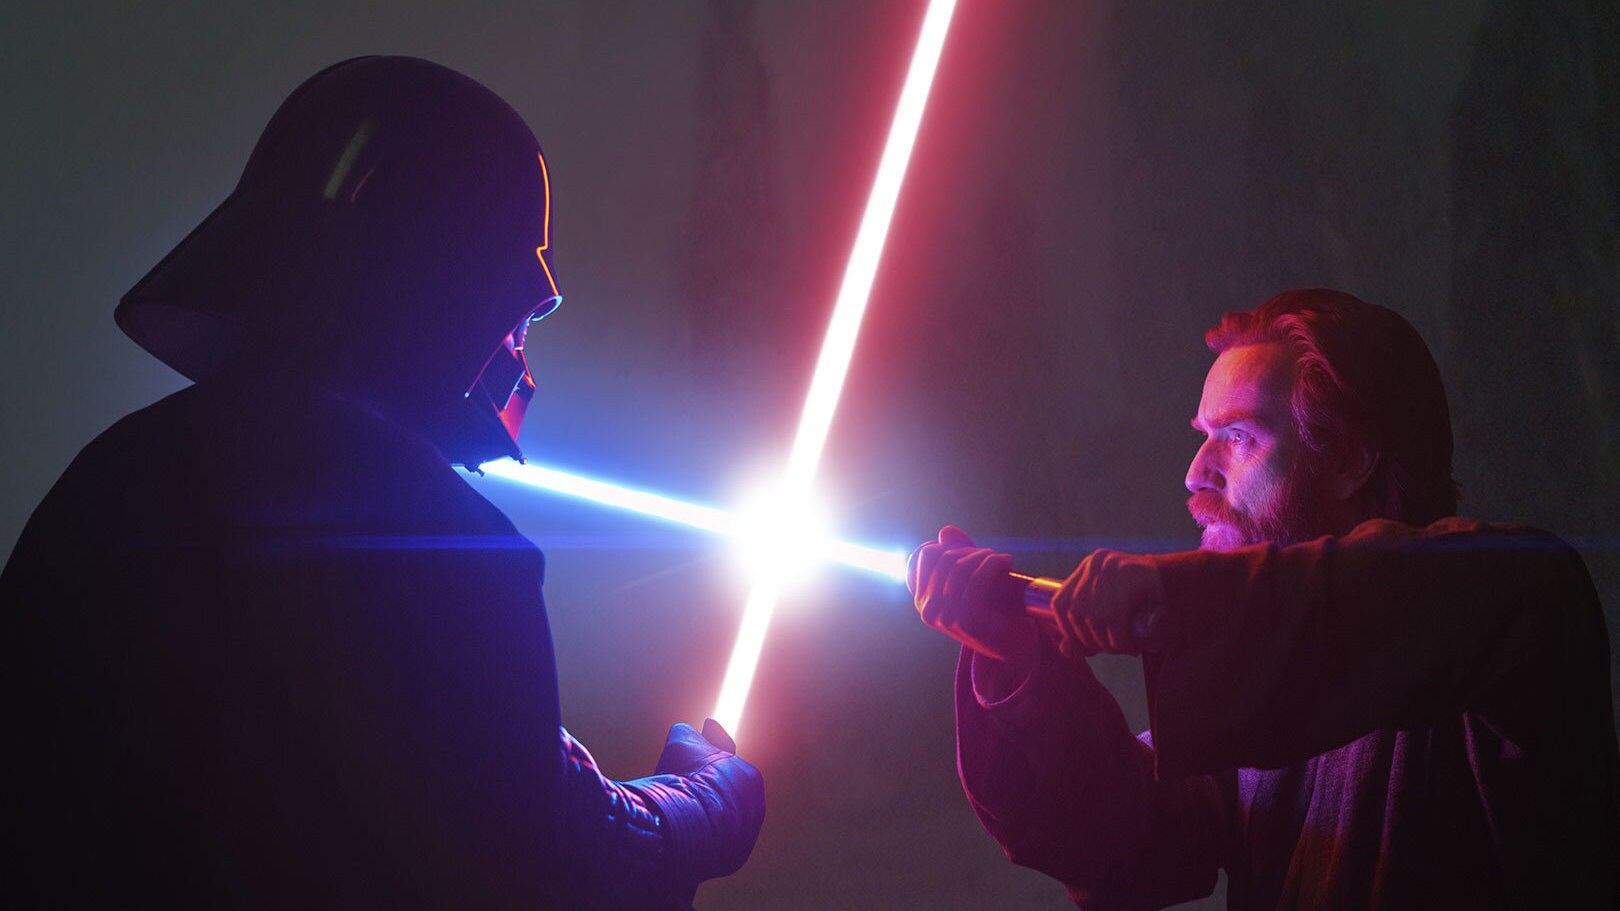 Kenobi and Vader meet on a nearby world of rocky spires. They ignite their lightsabers, and the b...